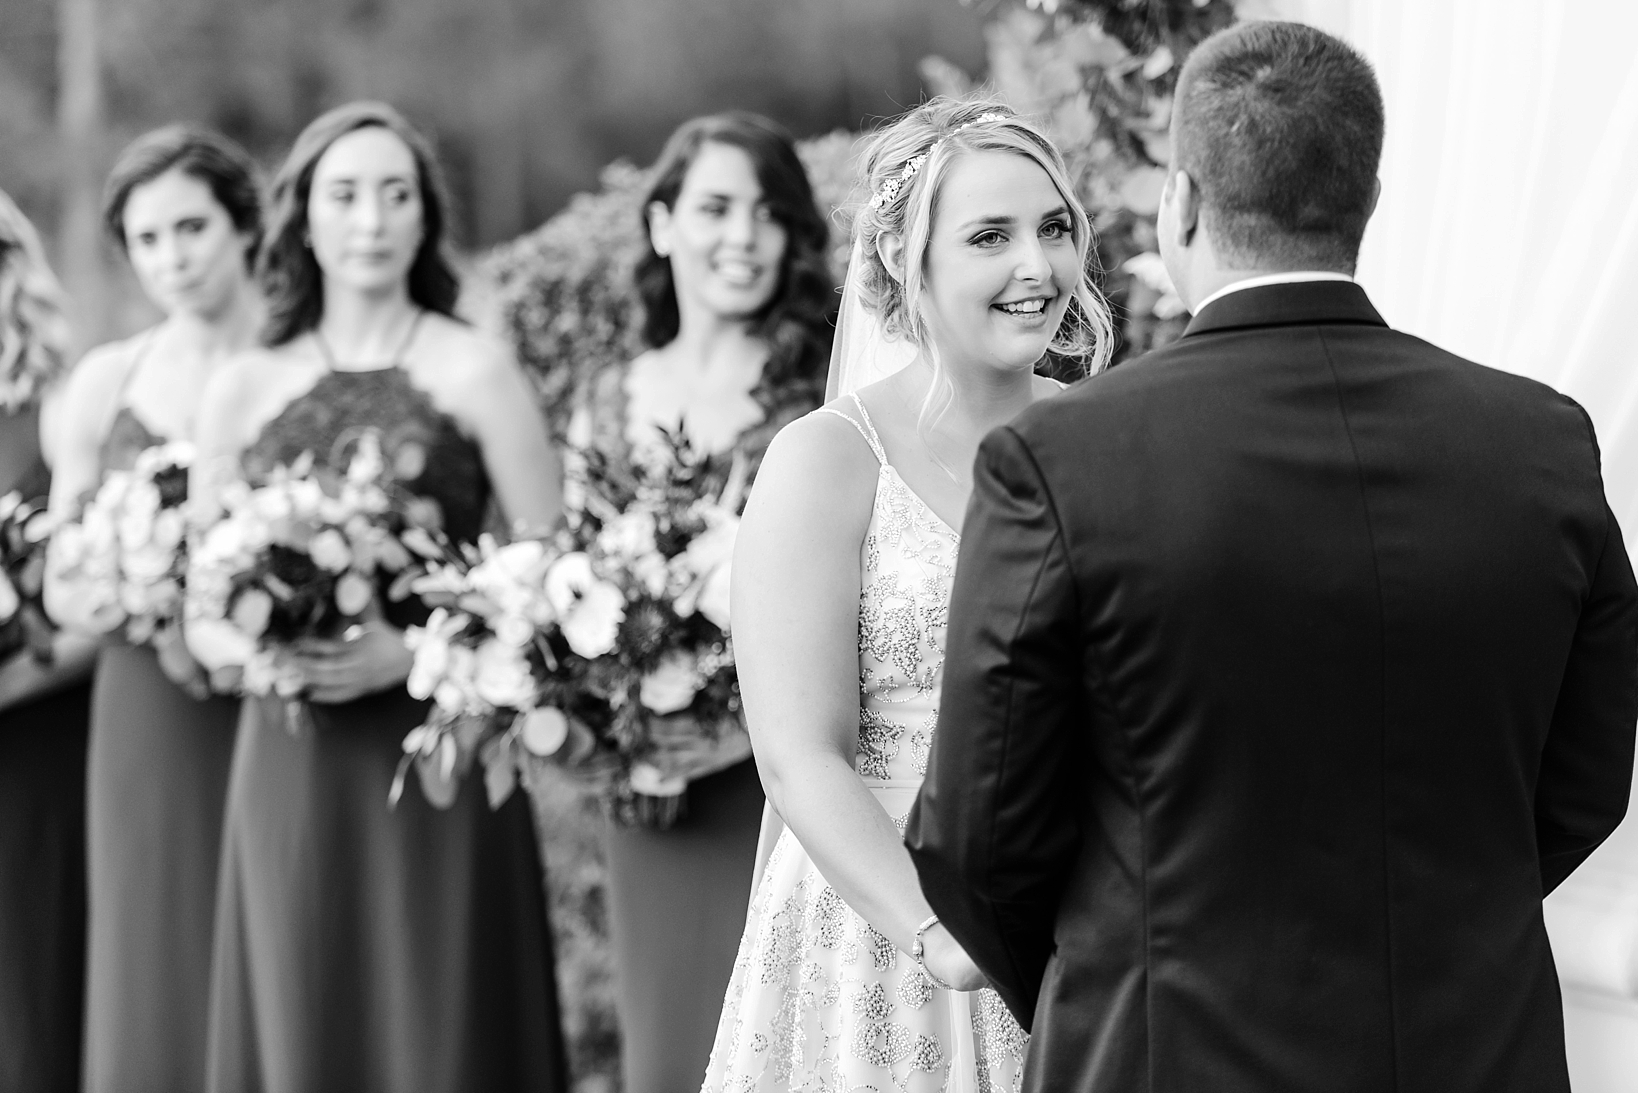 Black and White image of the Bride giving her vows during the ceremony by Sarah & Ben Photography